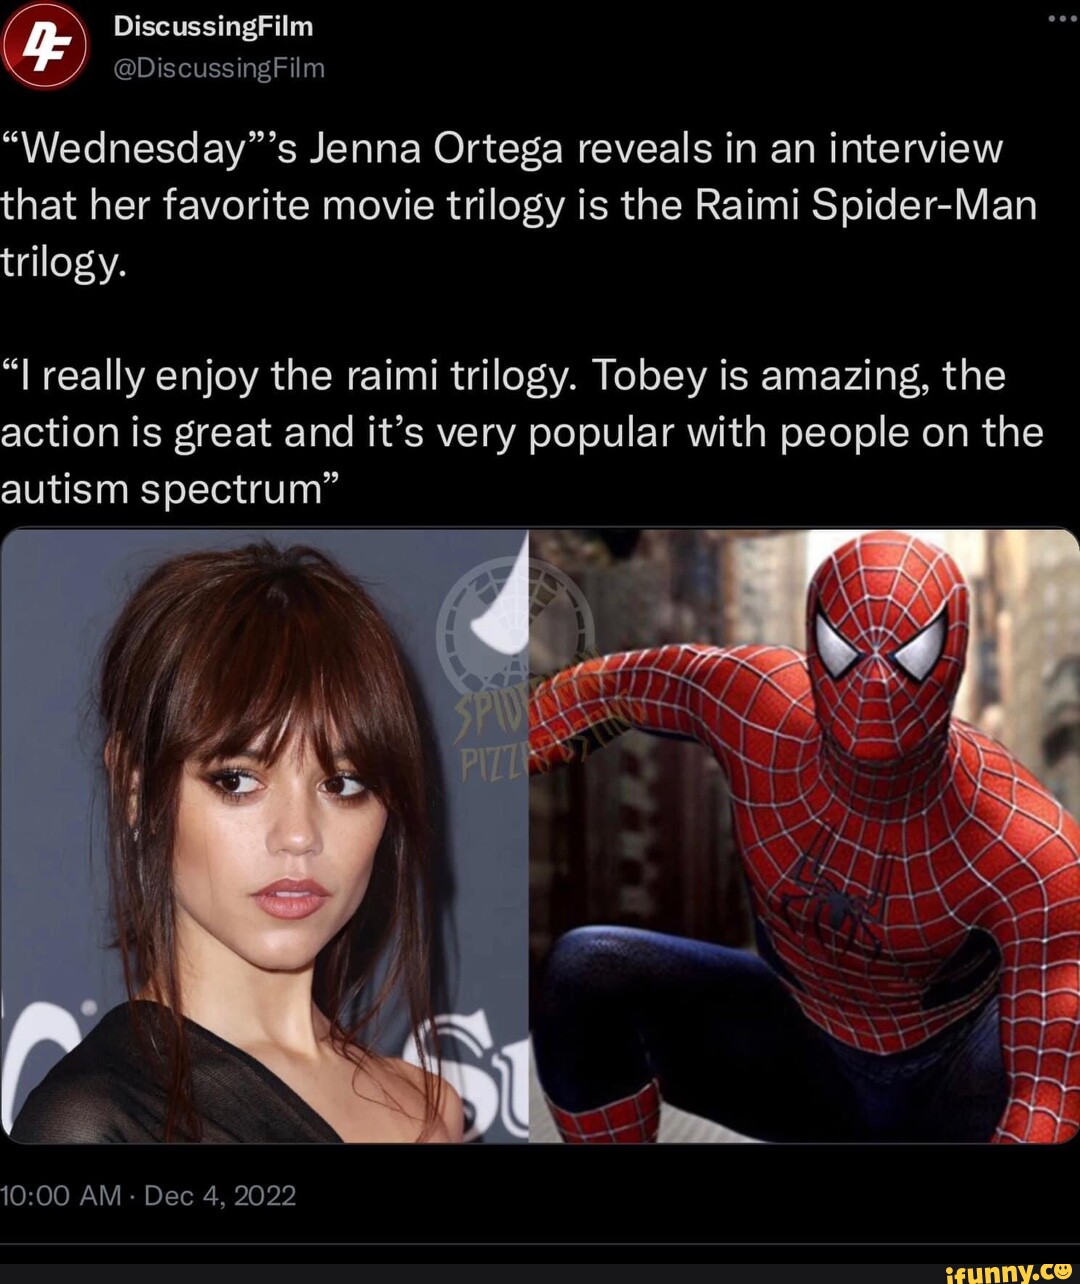 DiscussingFilm @DiscussingFilm Jenna Ortega reveals in an interview that  her favorite movie trilogy is the Raimi